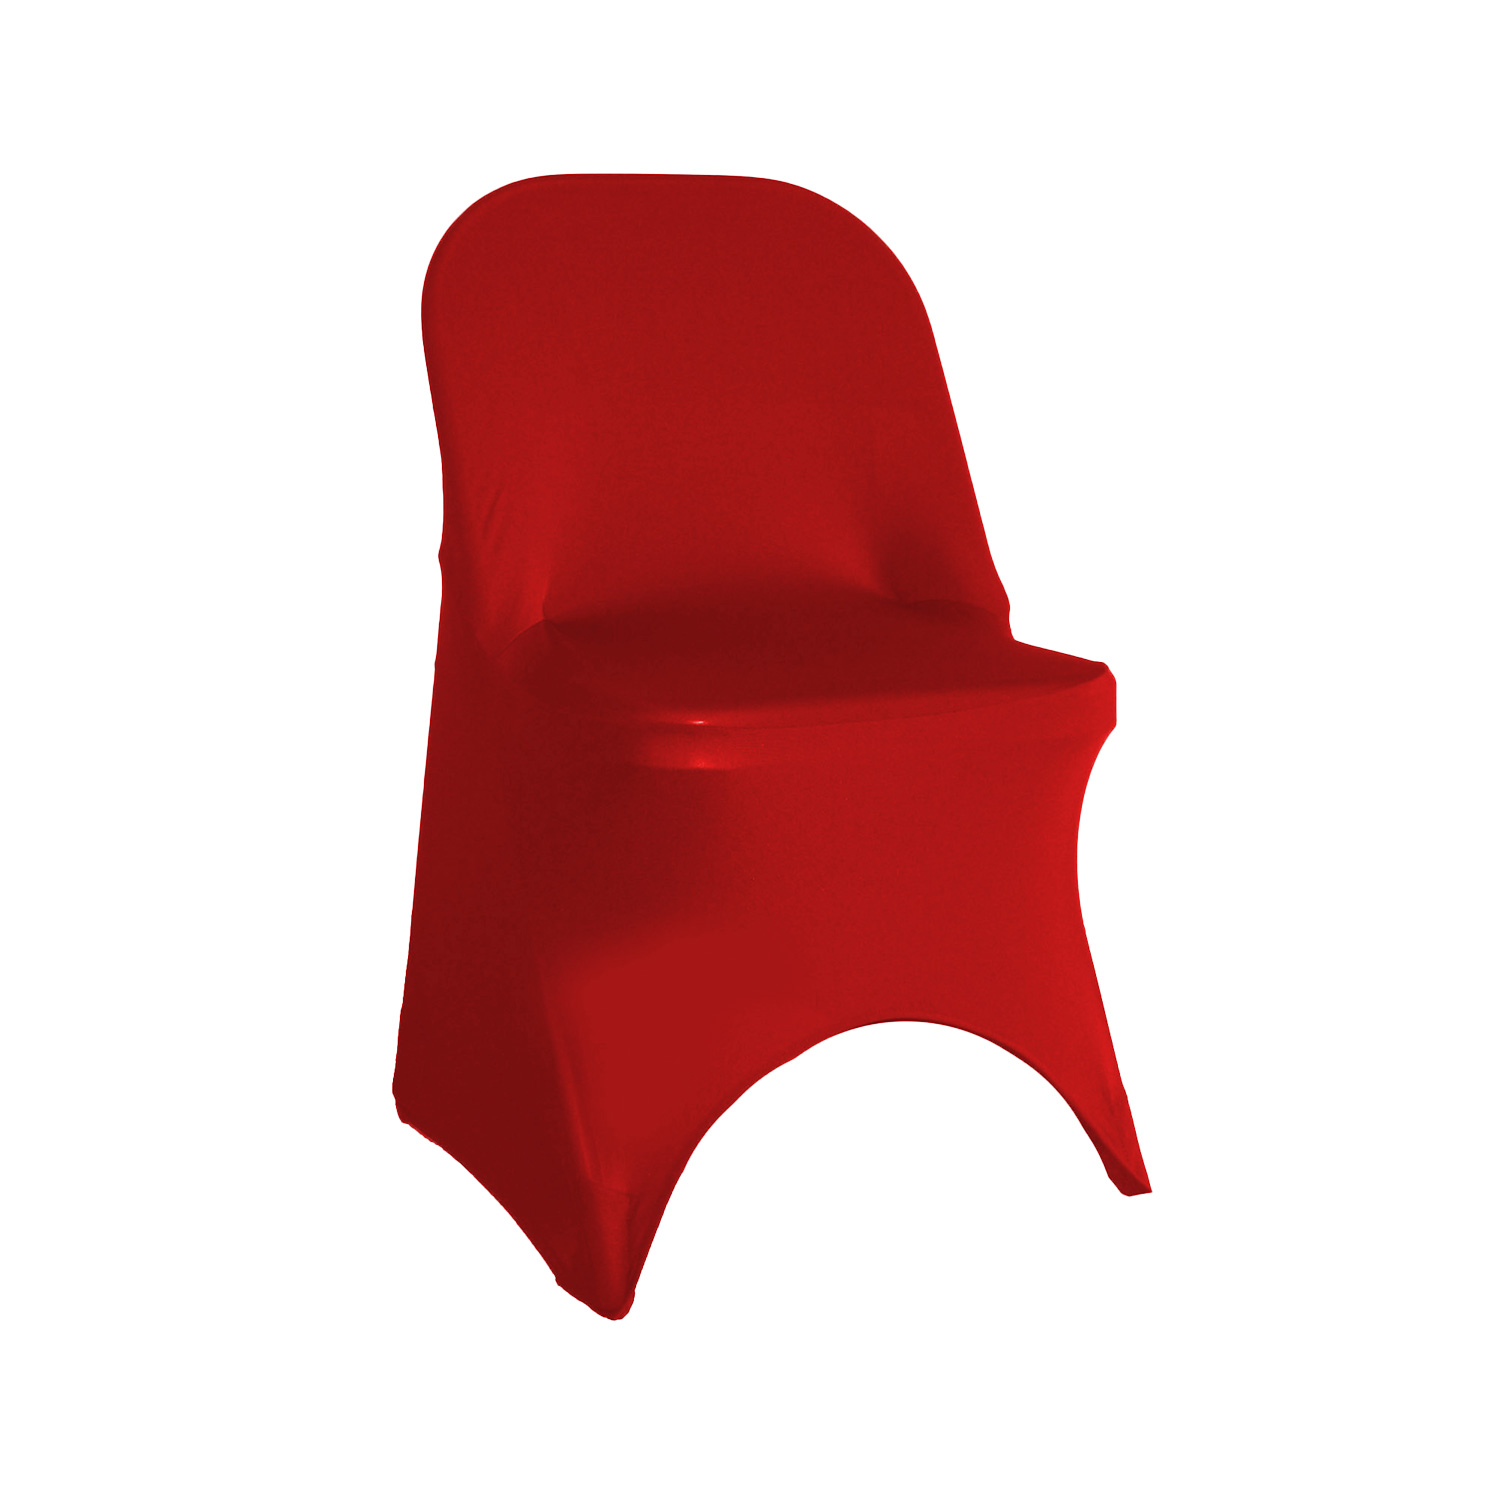 Your Chair Covers - Spandex Folding Chair Cover Red for Wedding, Party, Birthday, Patio, etc. - image 1 of 5